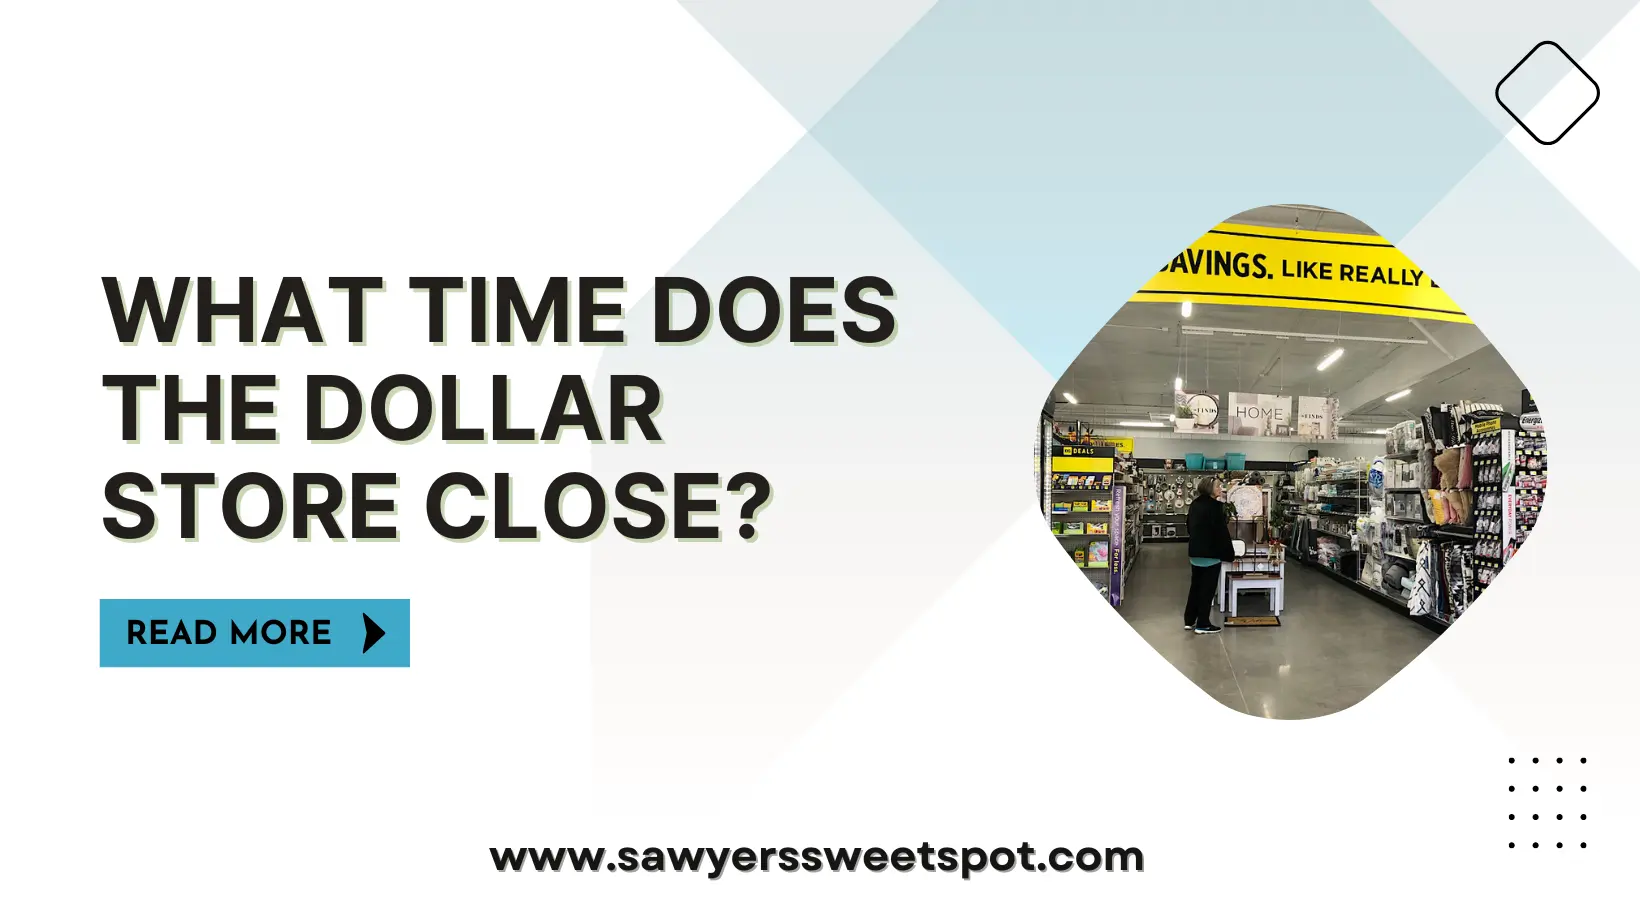 What Time Does the Dollar Store Close?